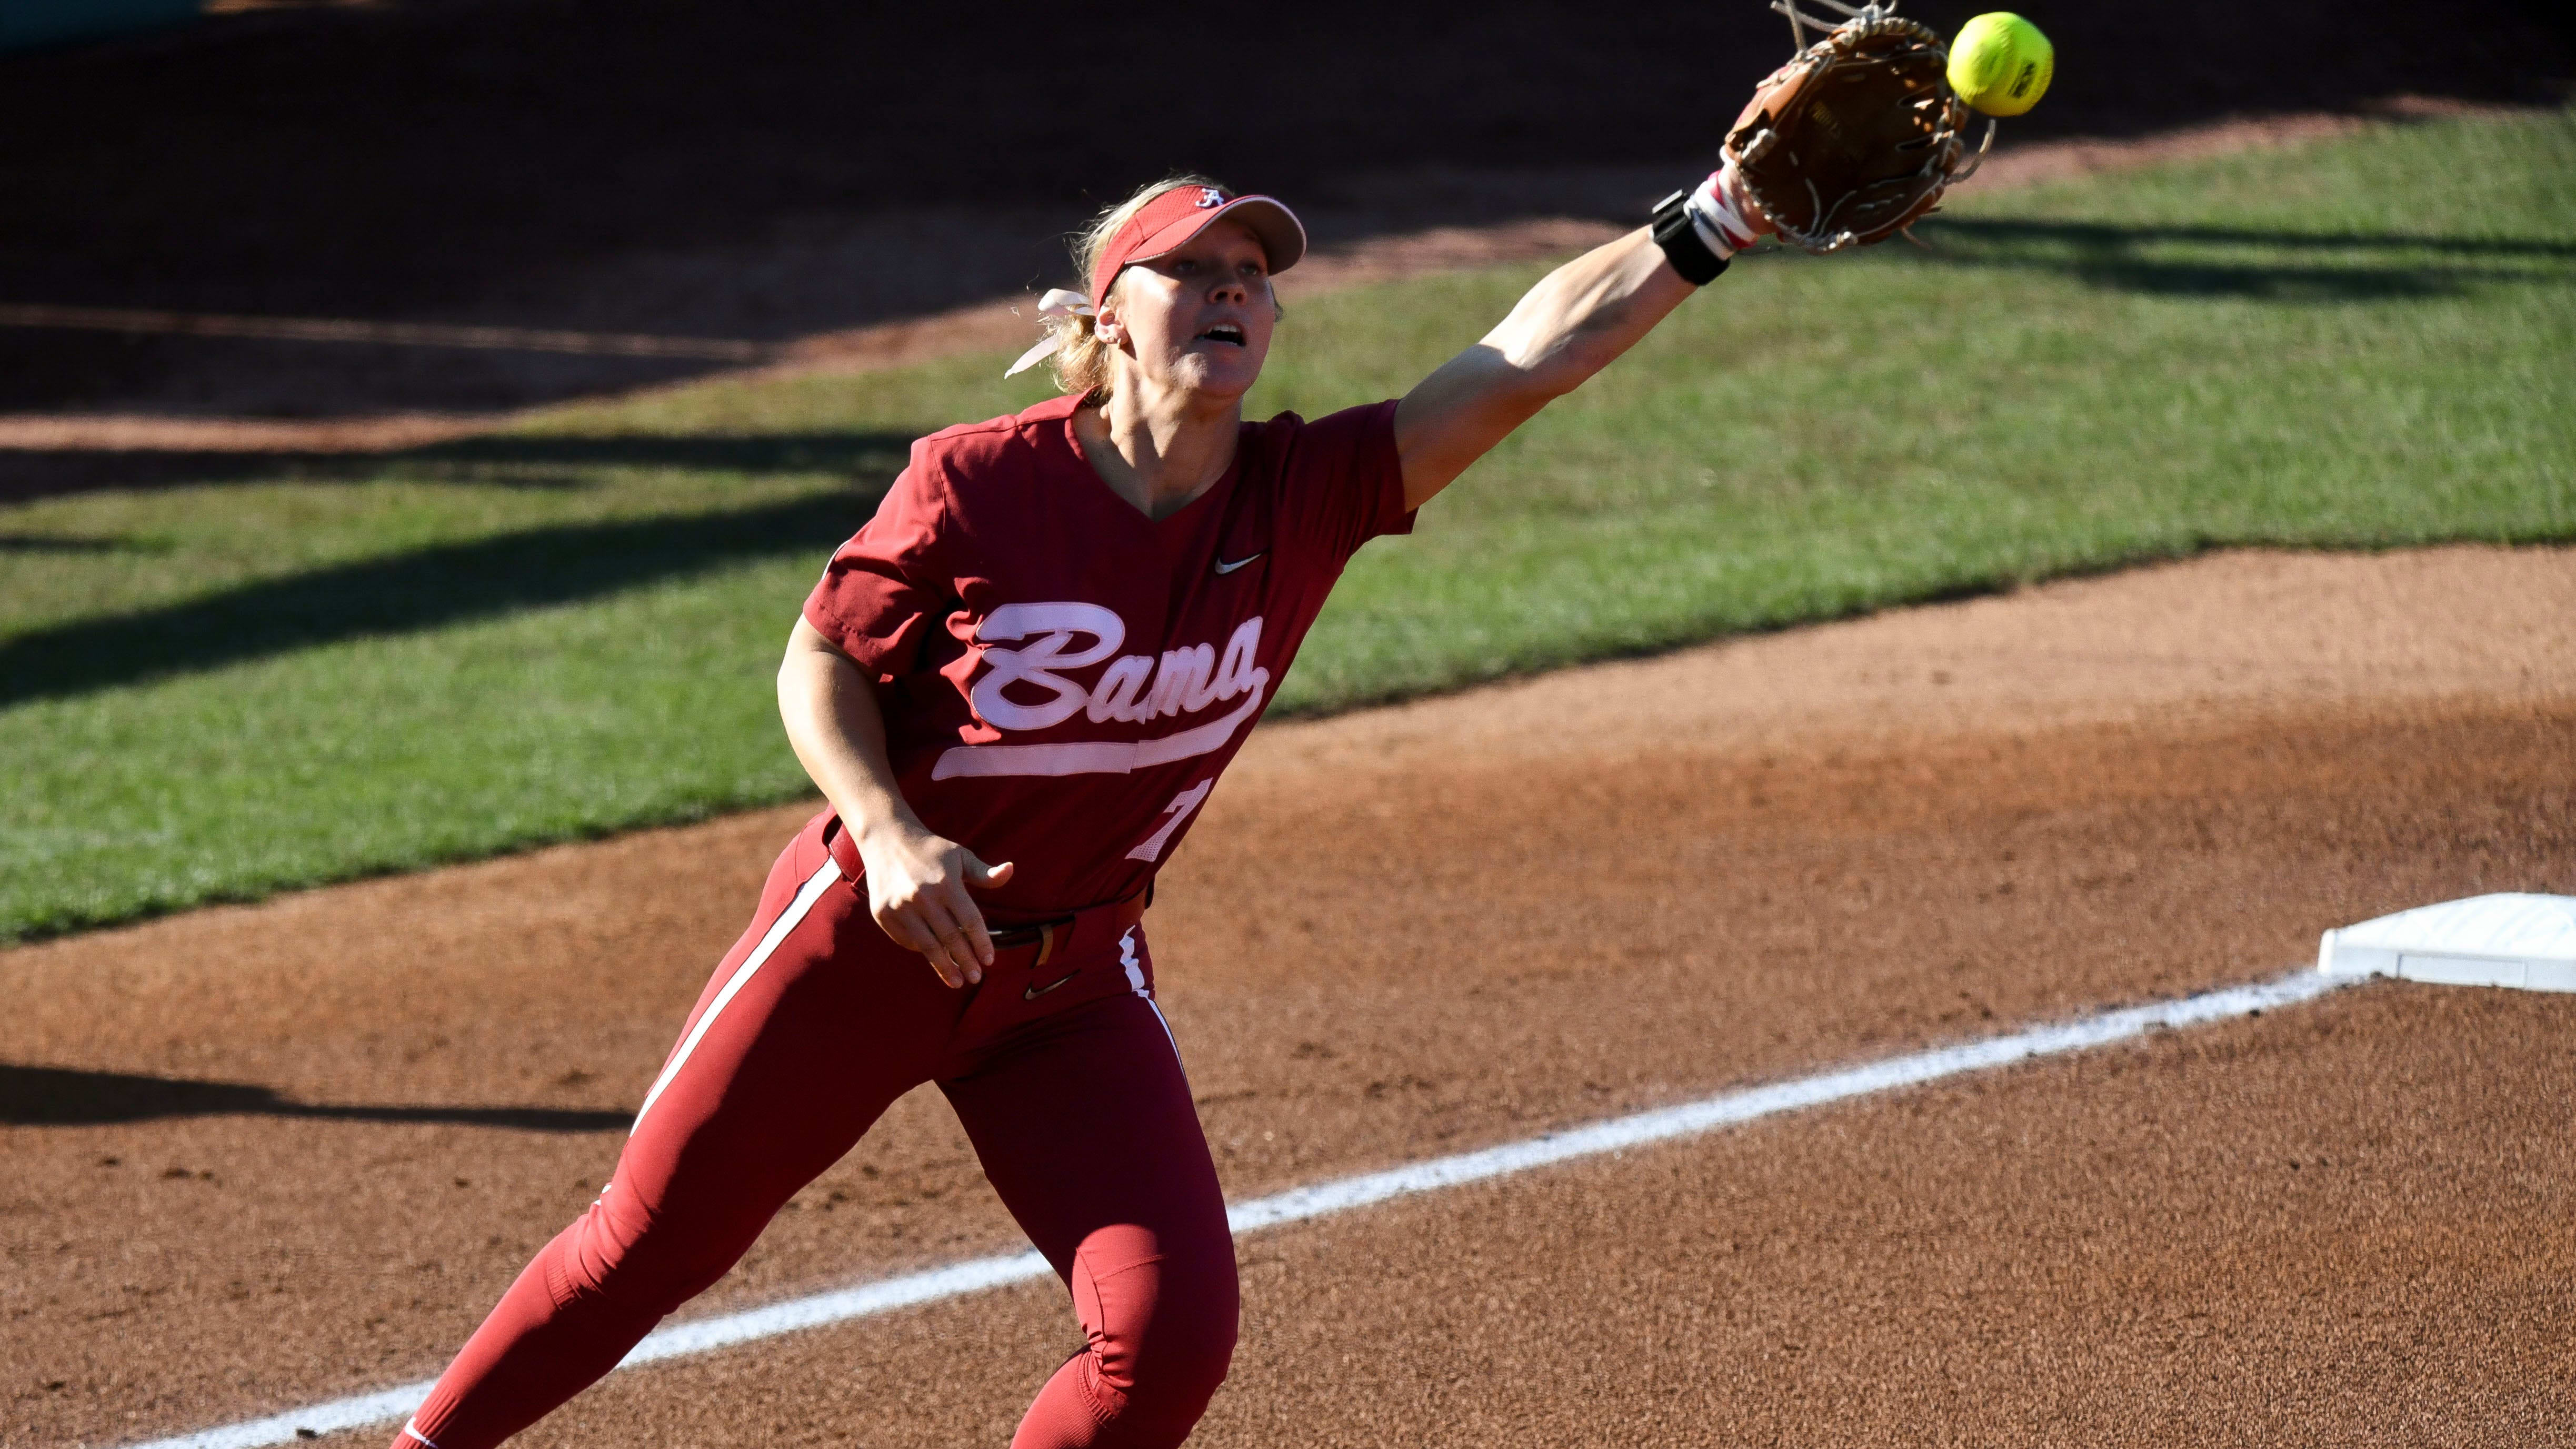 Alabama Softball vs. Kentucky: Wild Game Ends 6-3 with Coach Ejected & Dramatic Solo Home Runs